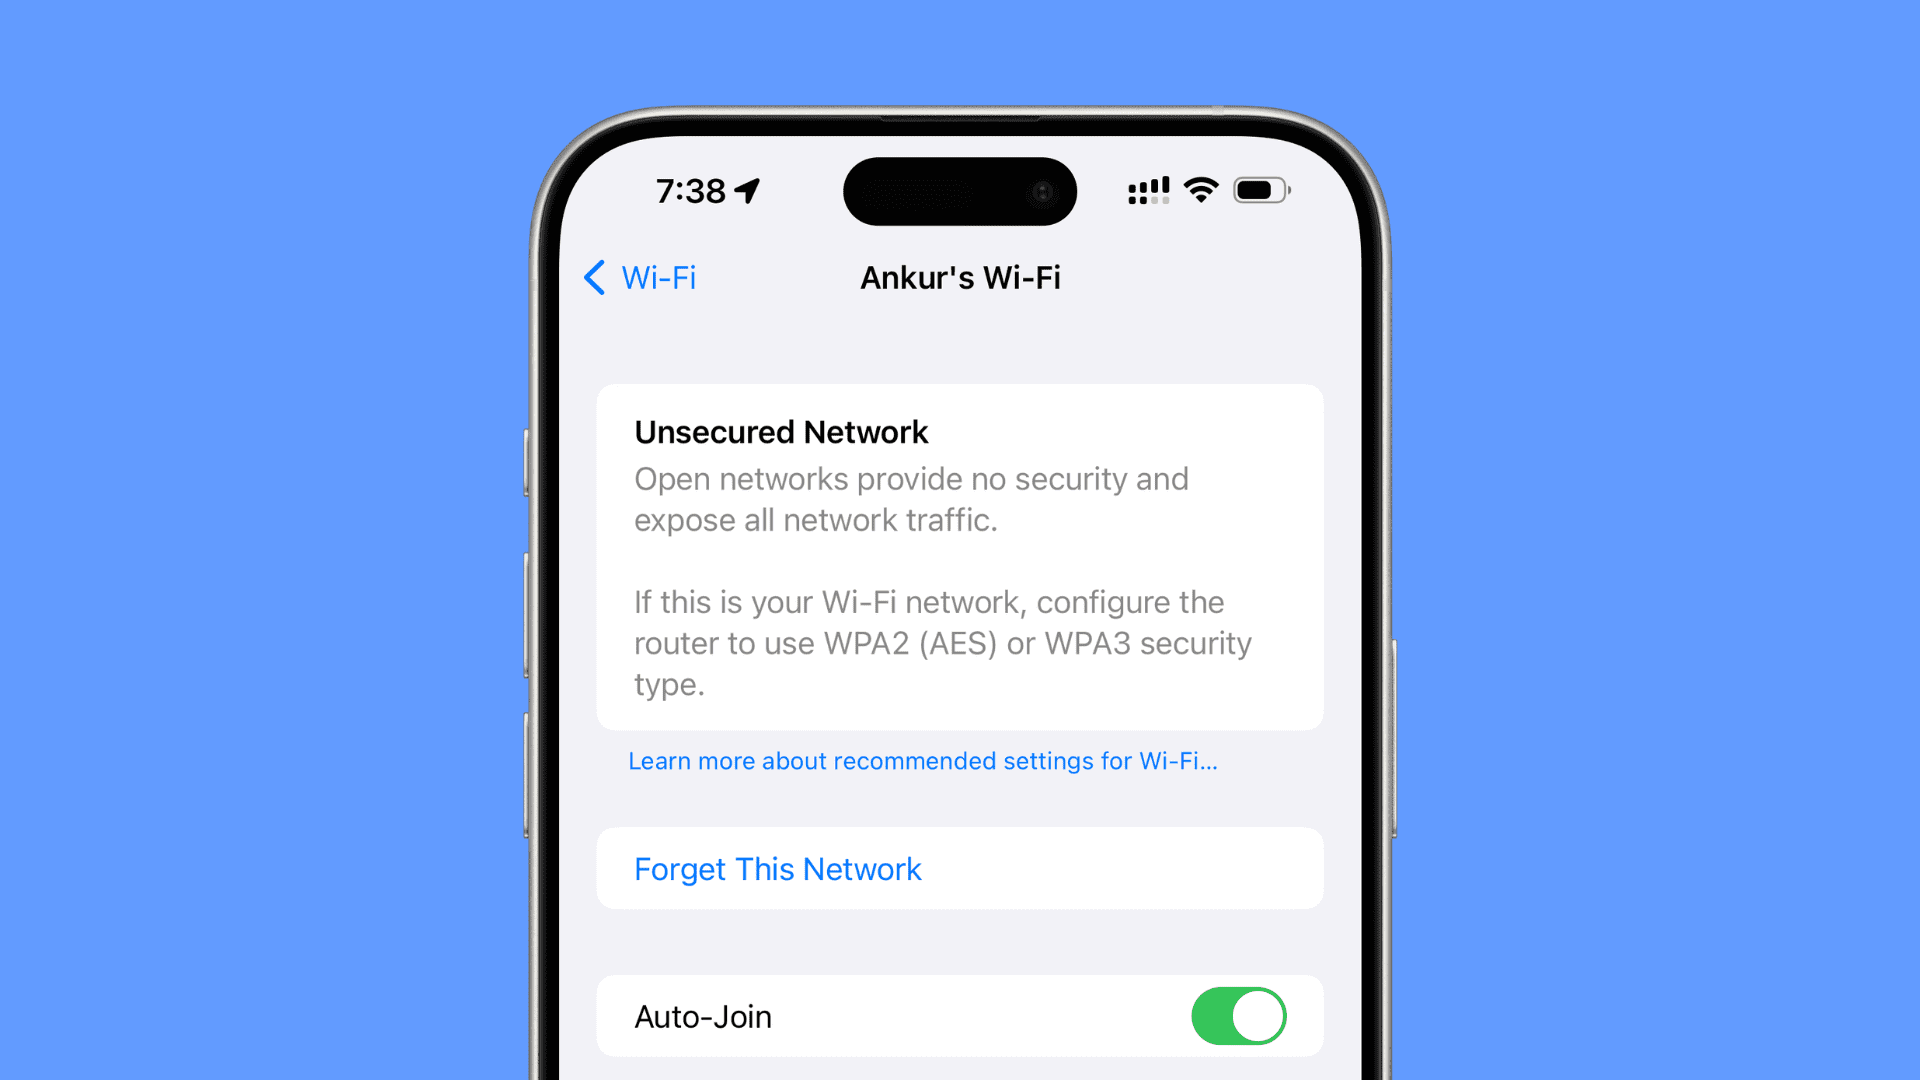 Unsecured Network message in iPhone Wi-Fi settings